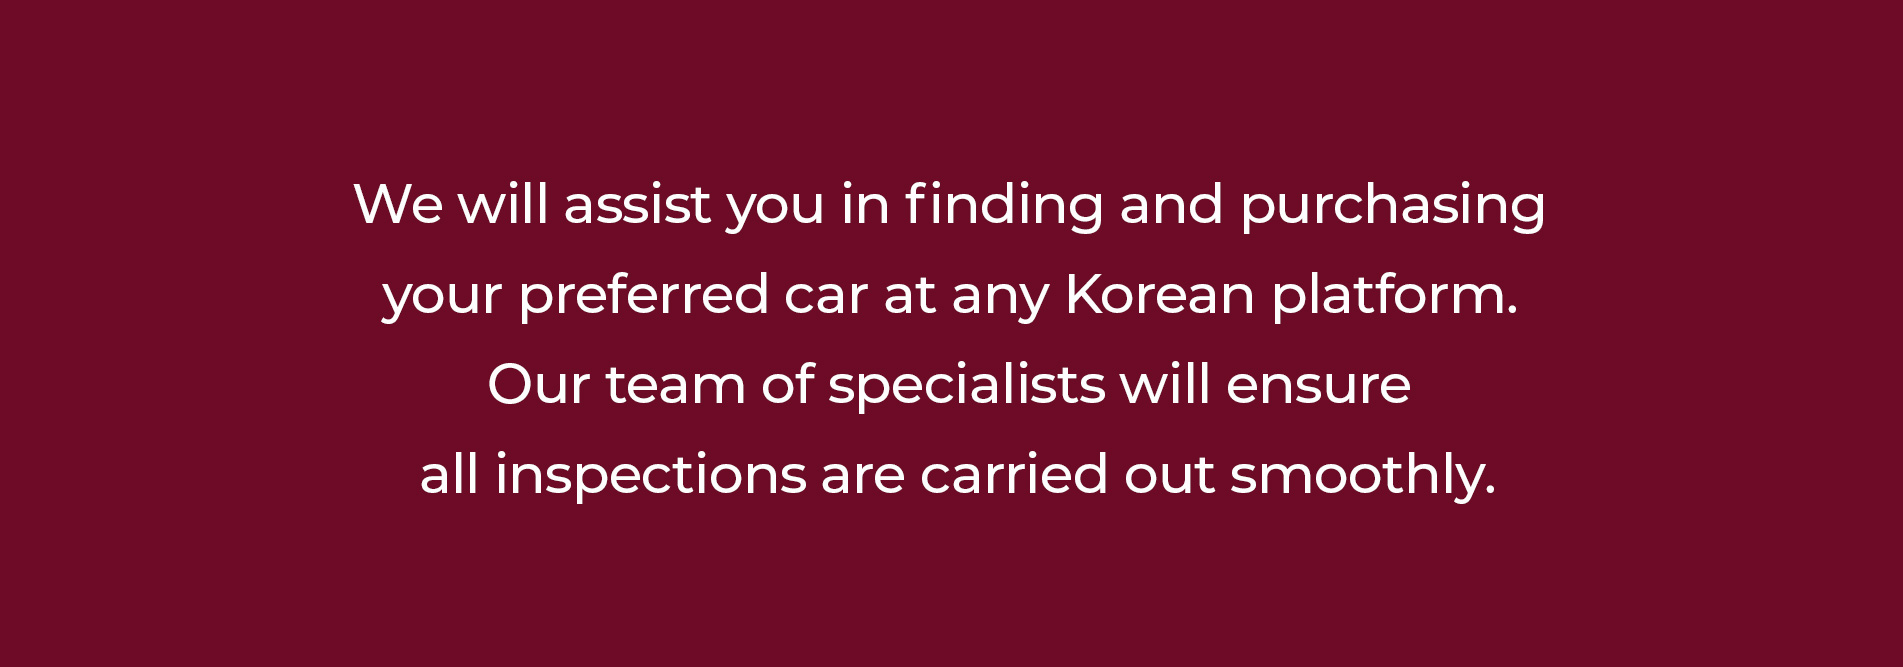 We will assist you in finding and purchasing your preferred car at any Korean platform. Our team of specialists will ensure all inspections are carried out smoothly.